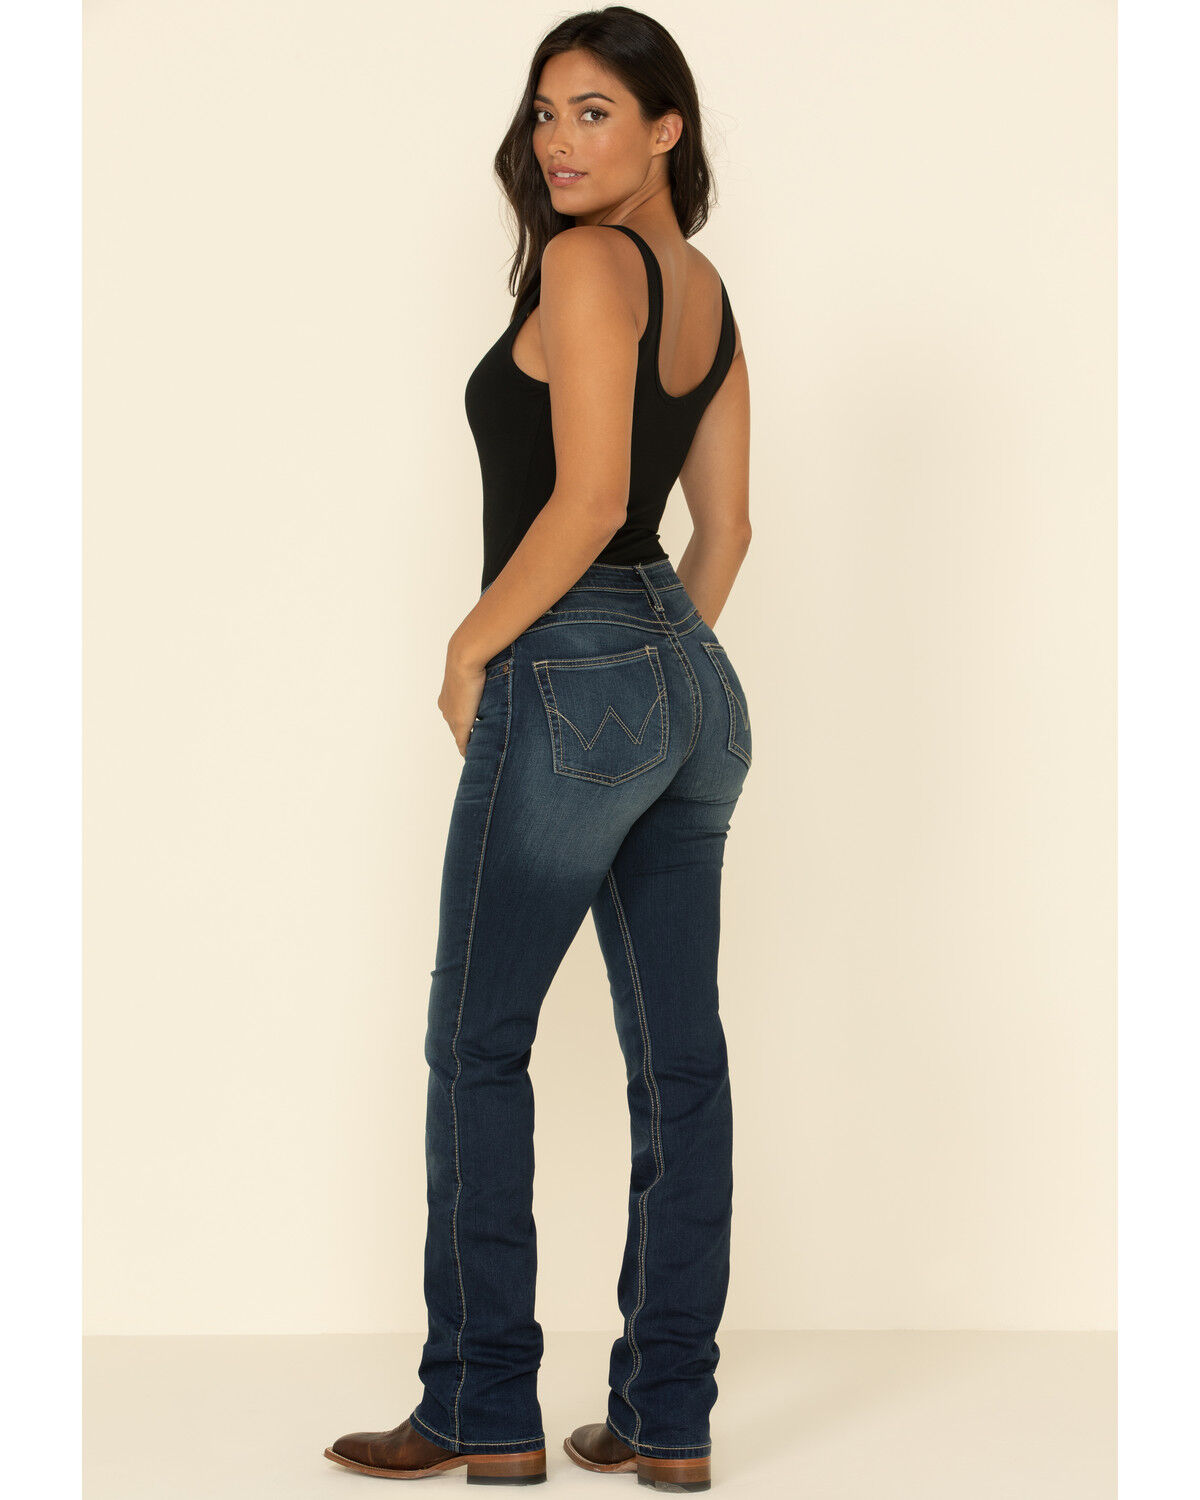 Q-Baby Dark Wash Ultimate Riding Jeans 